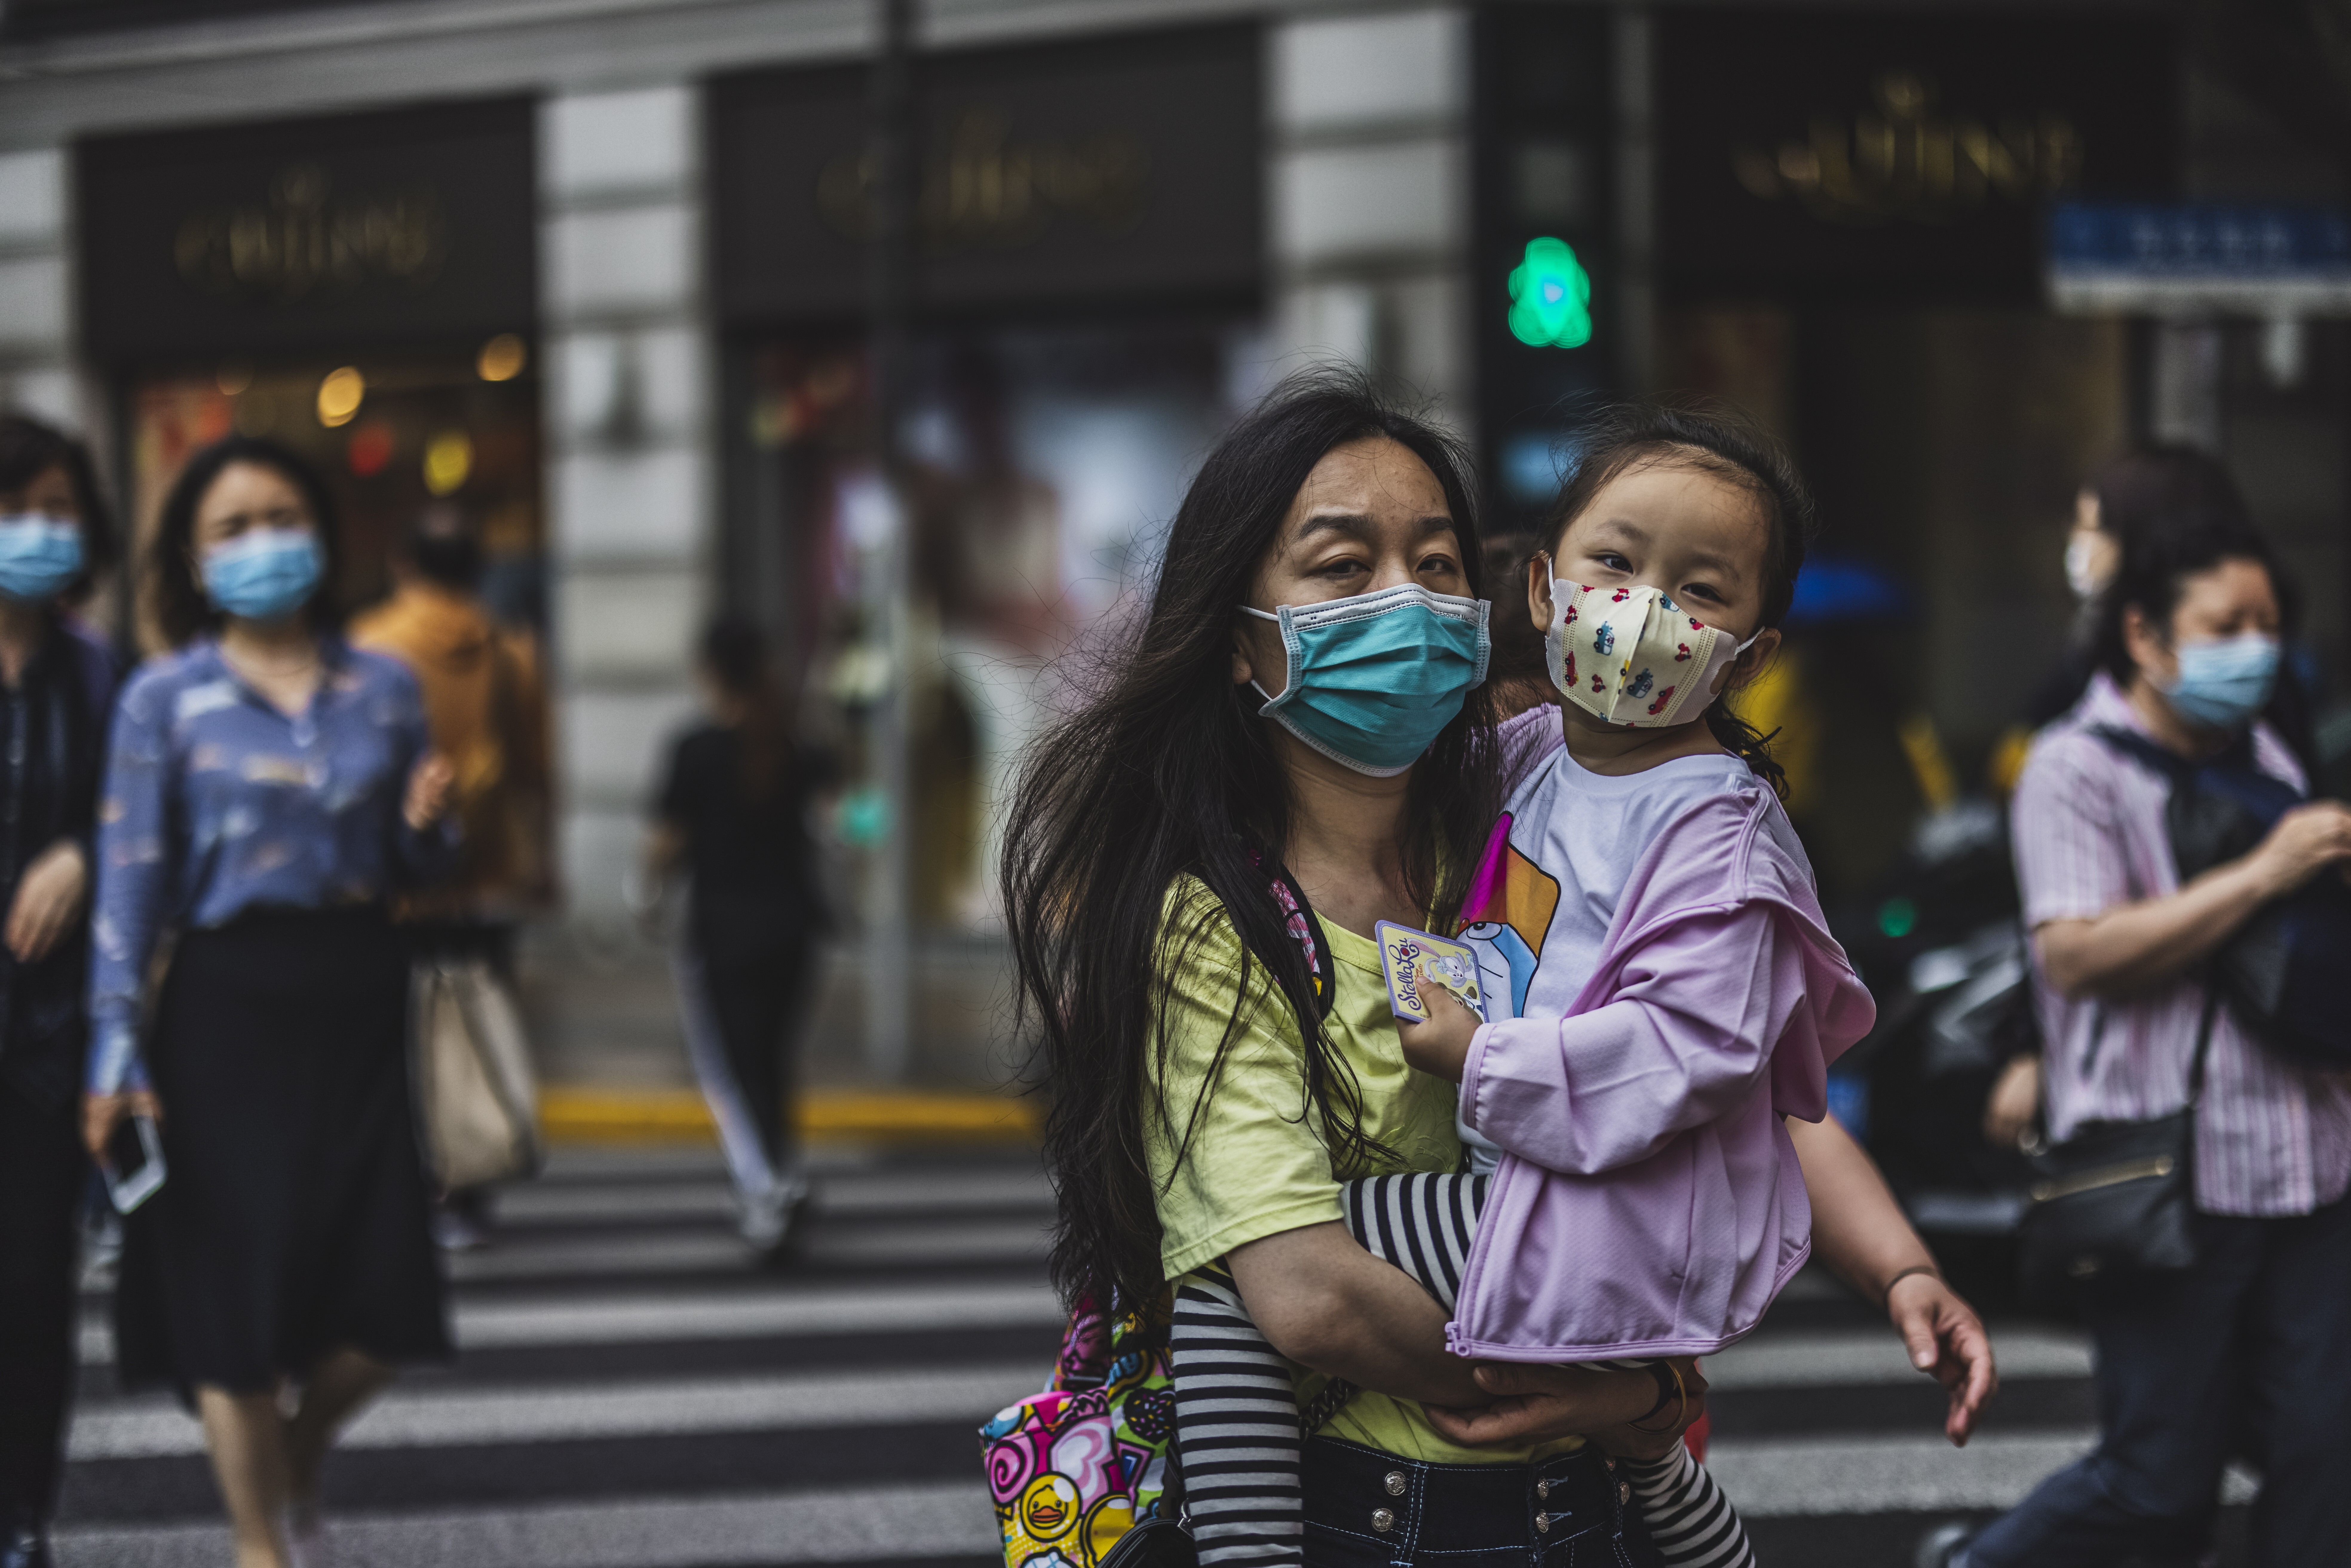 People cross the street in Shanghai on May 11. China must make a whole-of-society push to raise the birth rate, and this must include making childcare more accessible to working families. Photo: EPA-EFE